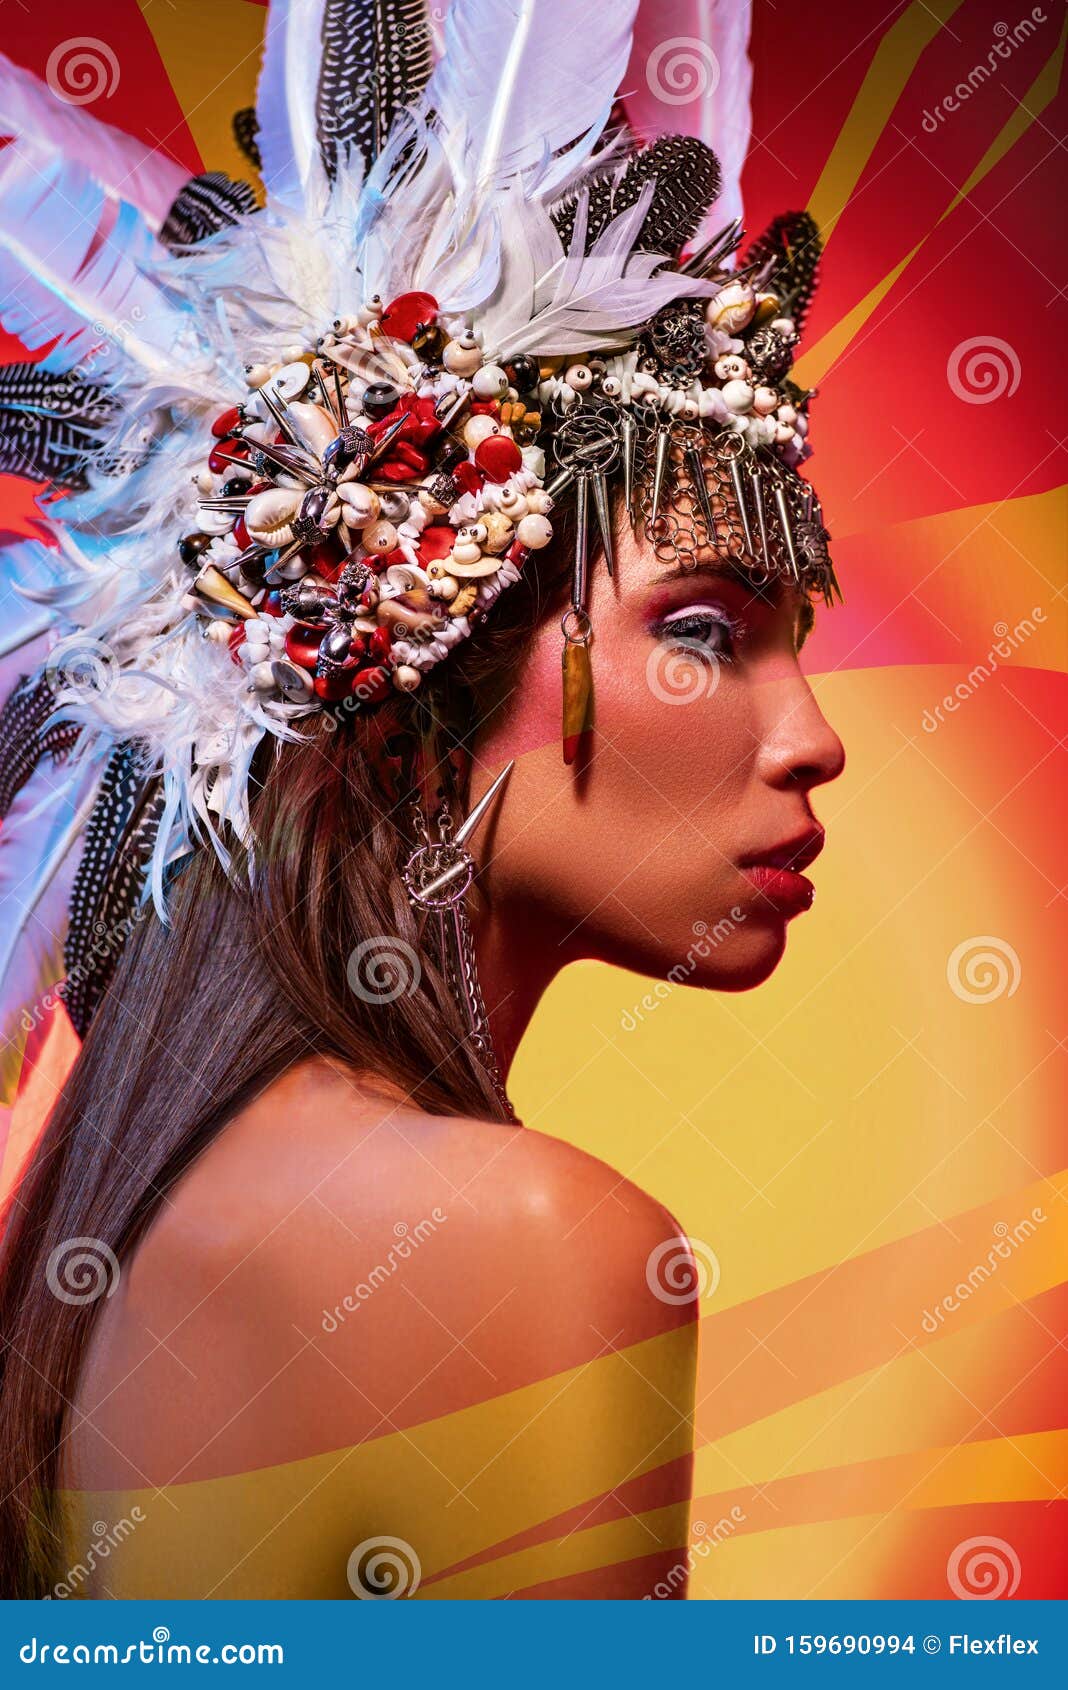 side view of beautiful naked woman in tribal headdress